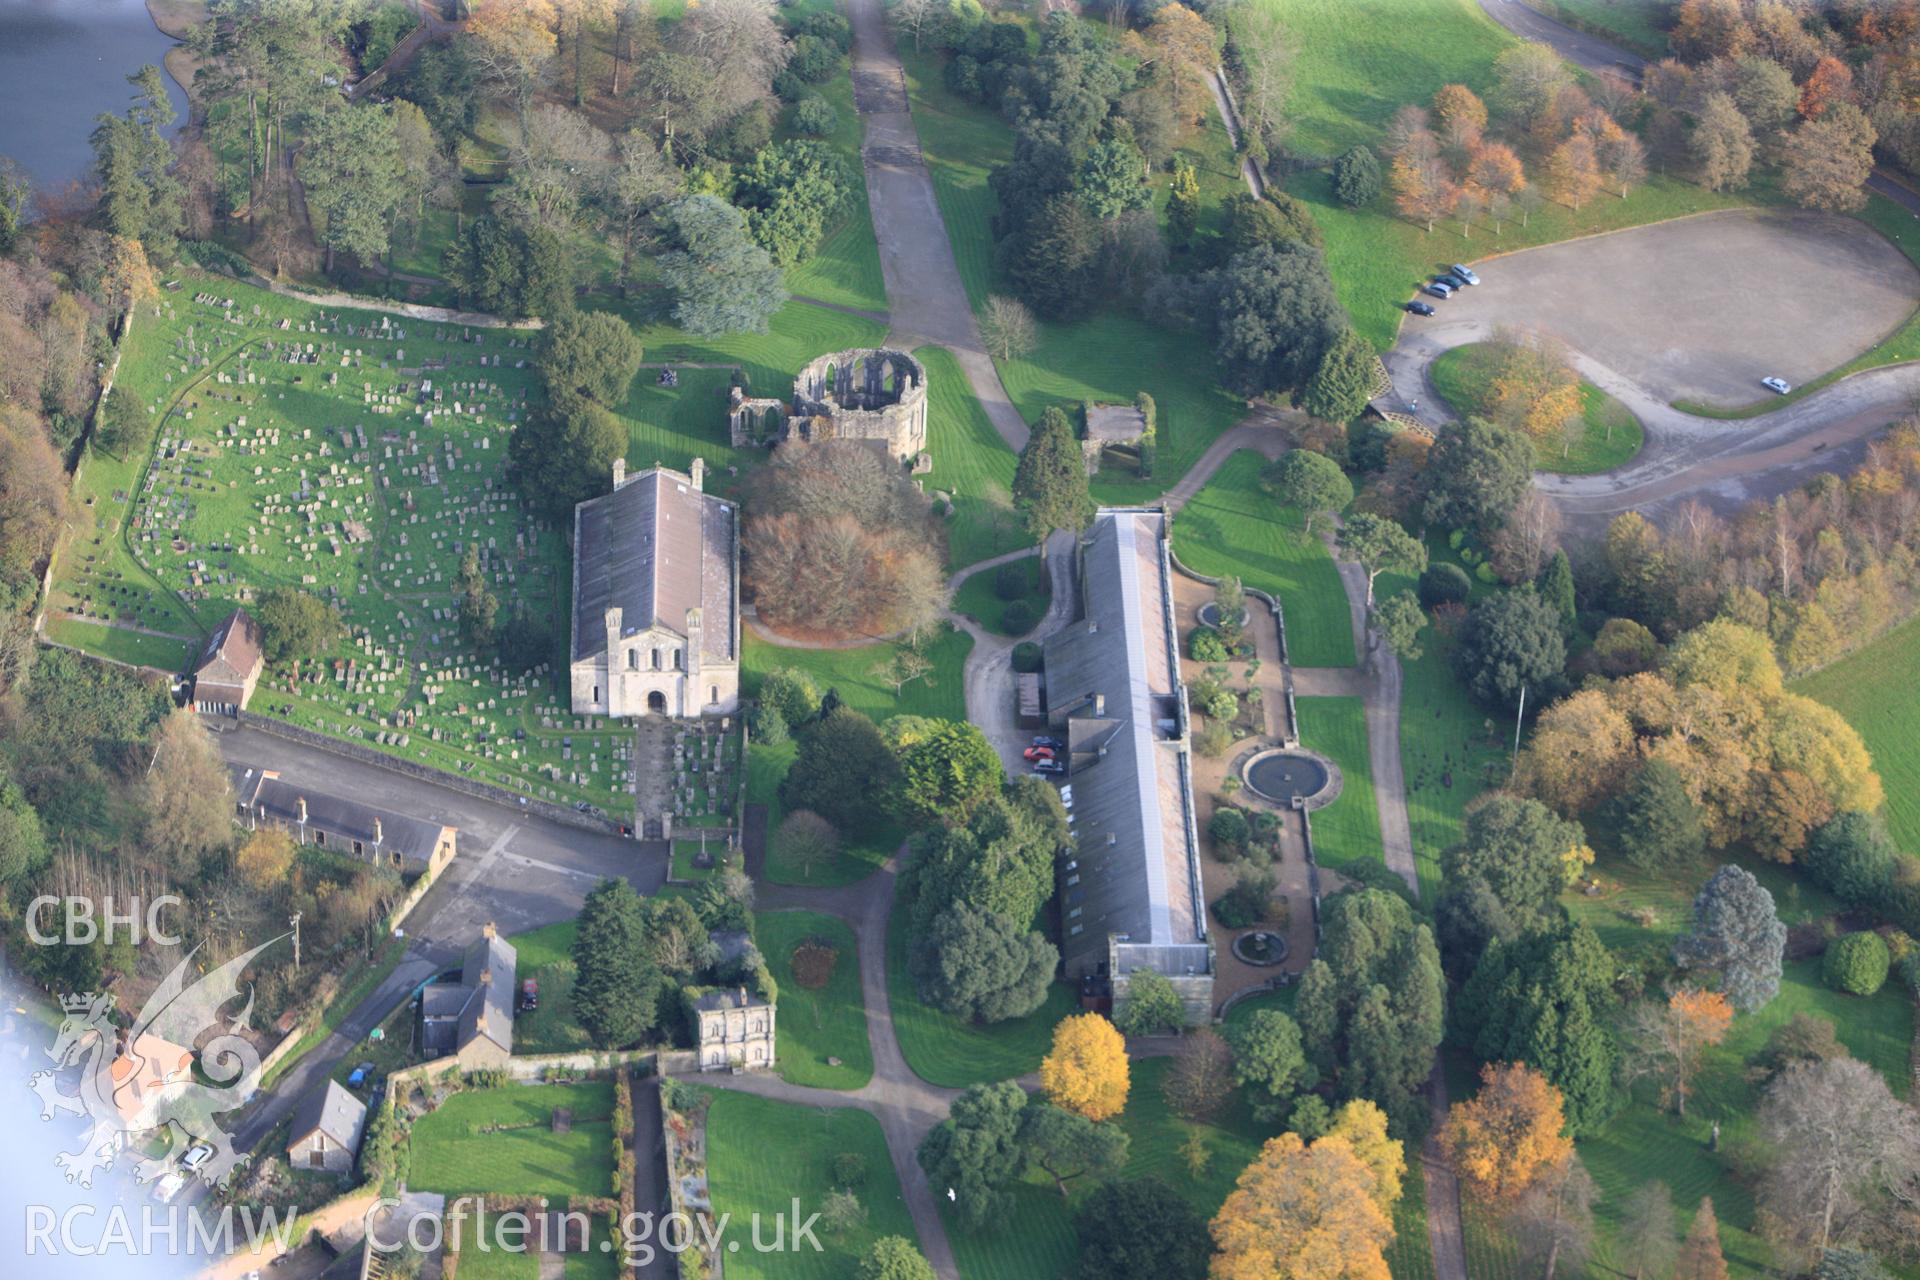 RCAHMW colour oblique photograph of Margram Abbey. Taken by Toby Driver on 17/11/2011.